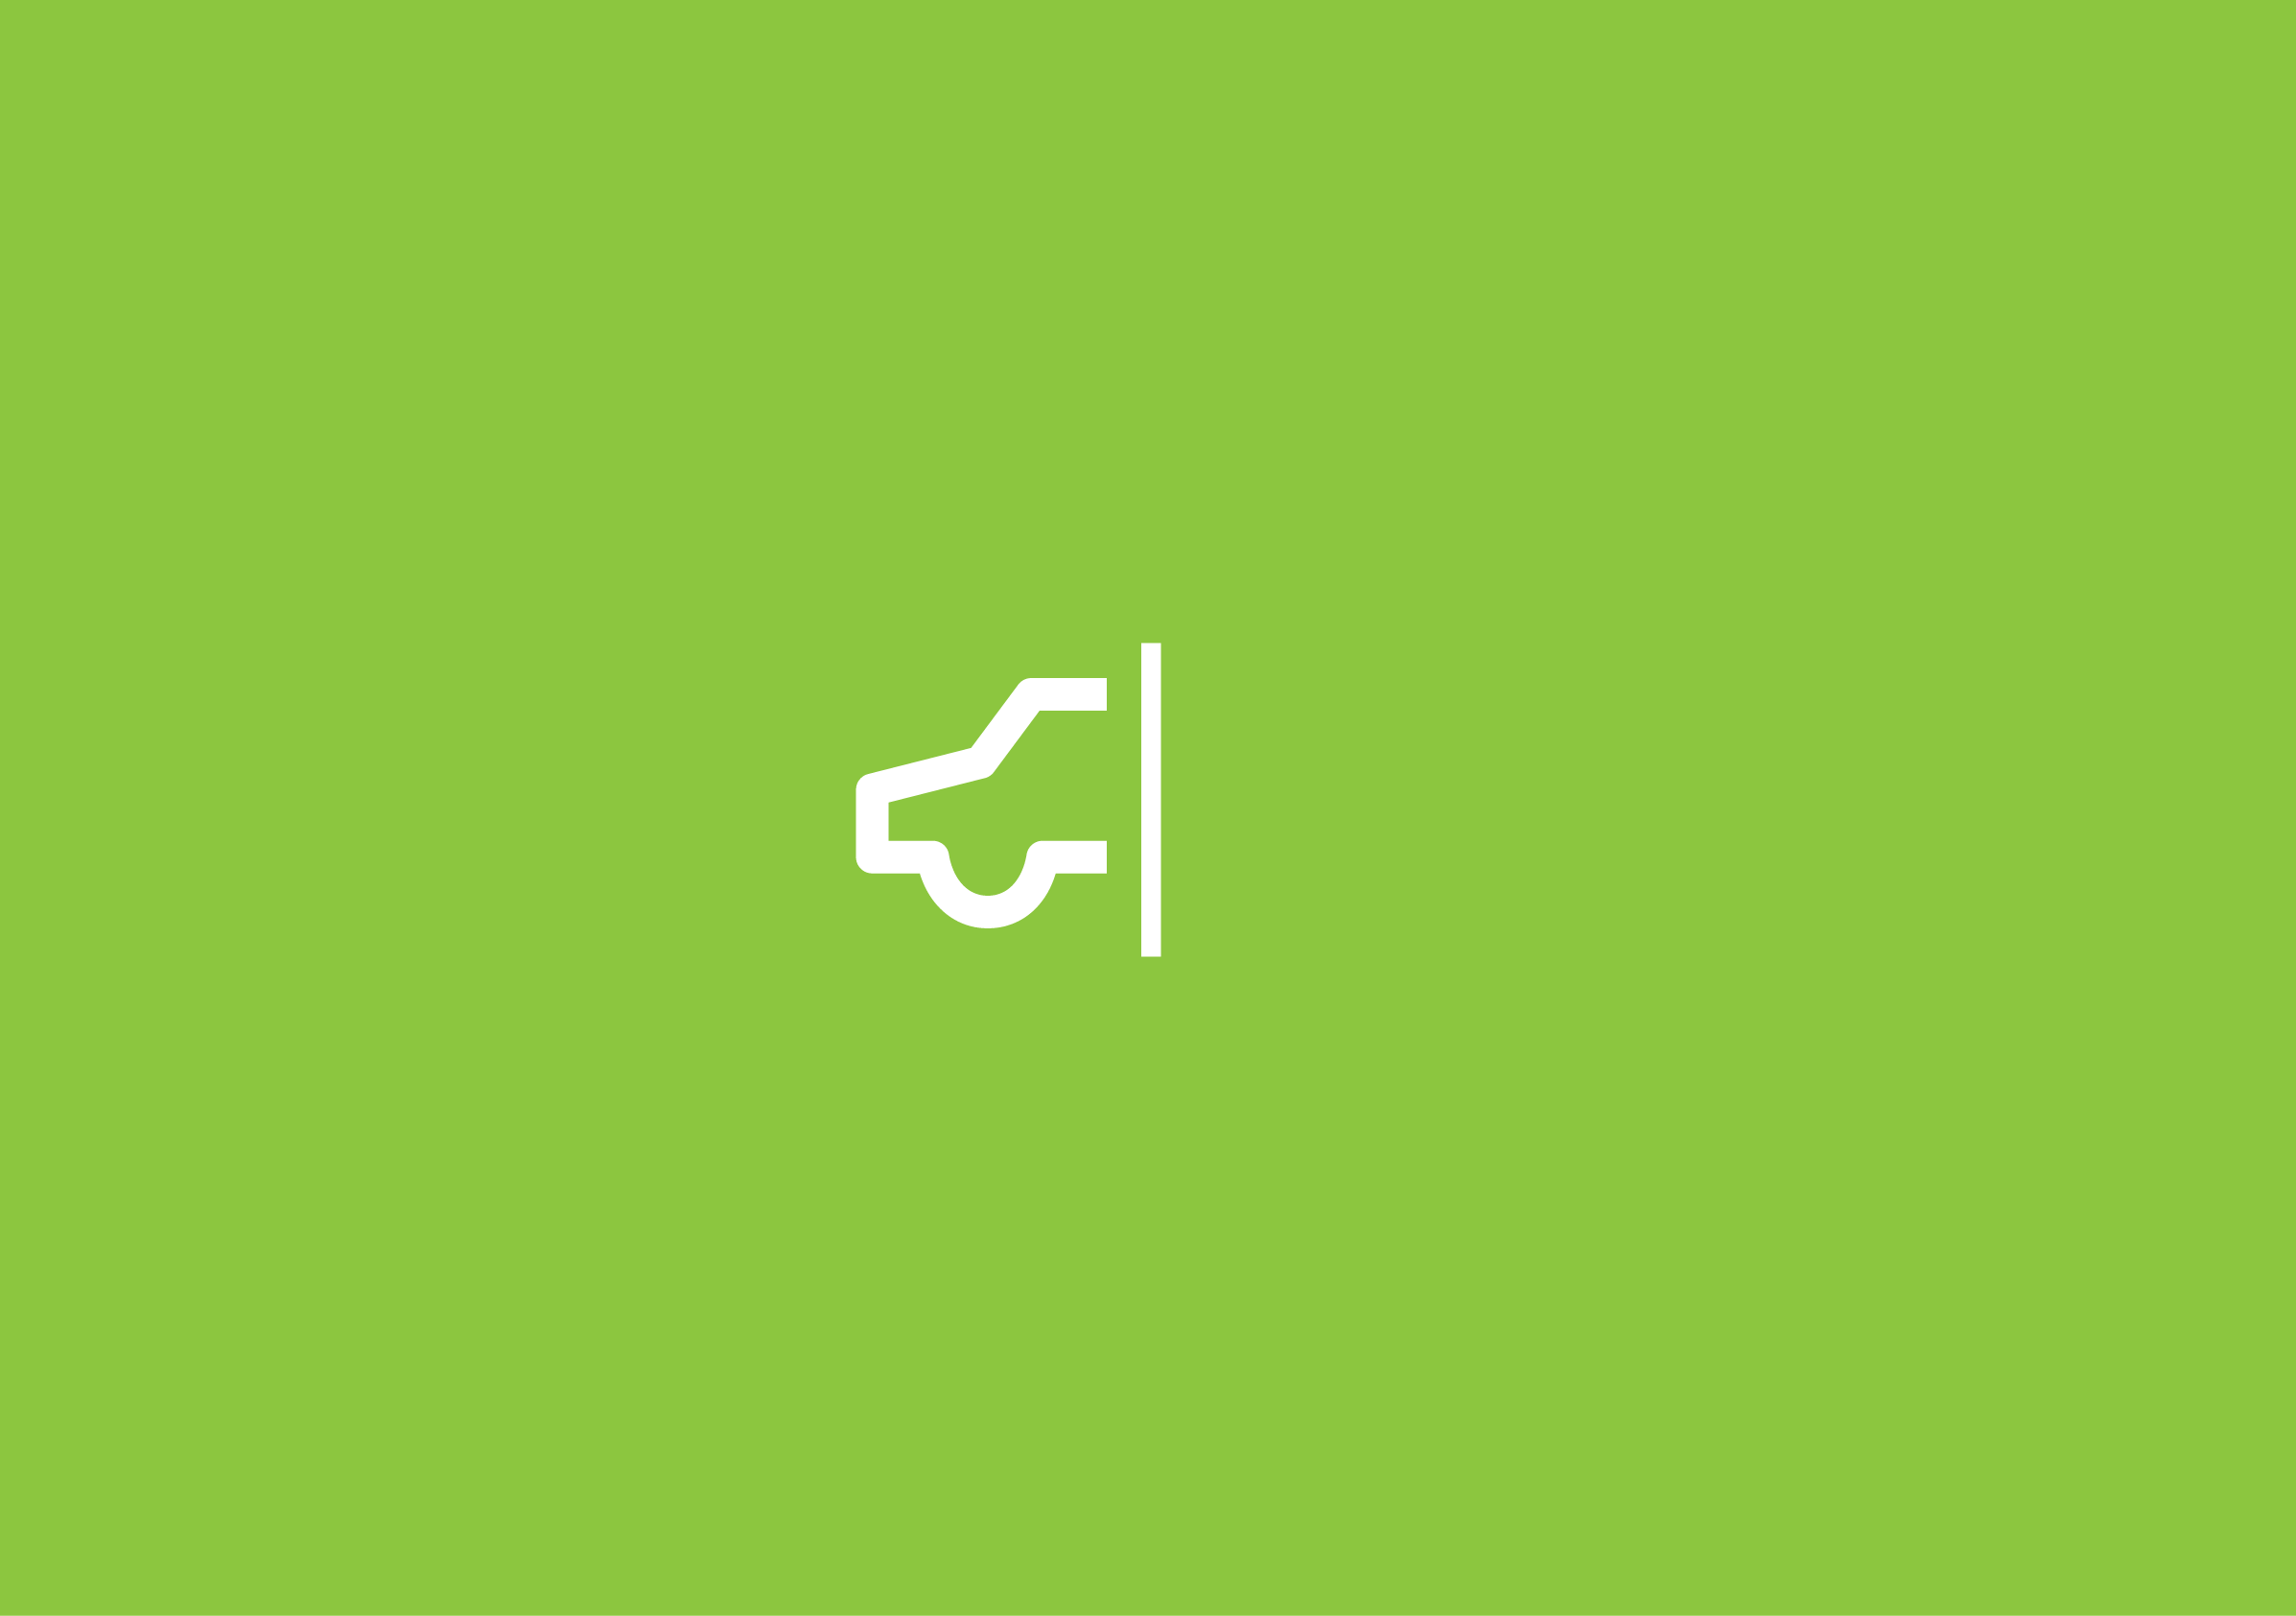 Symbol reversed for Flipped, an automobile sales company by Ottawa Graphic Designer idApostle